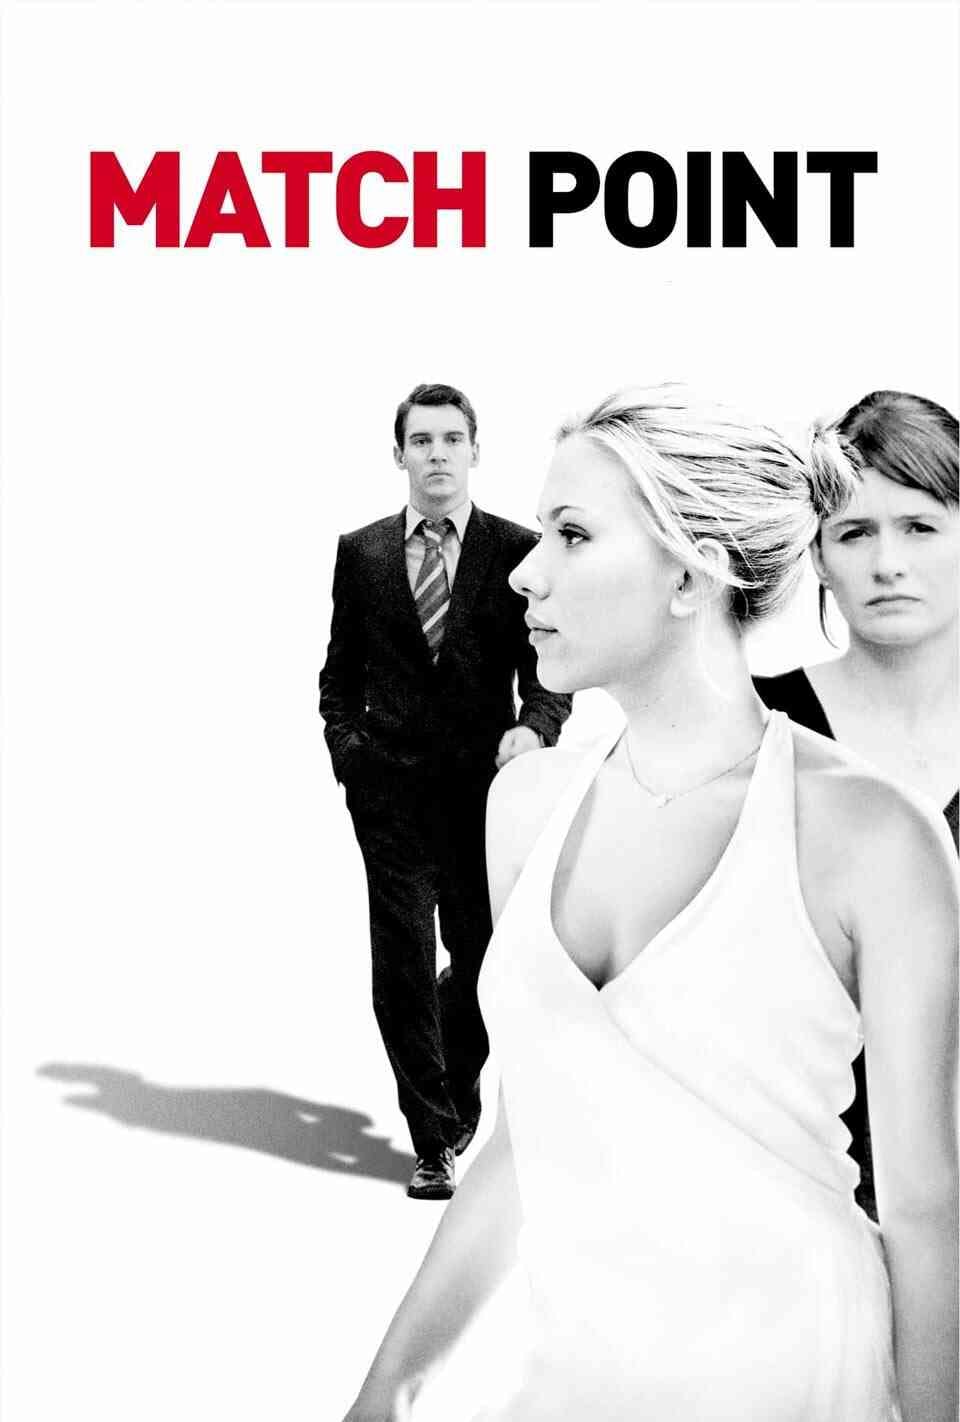 Read Match Point screenplay.